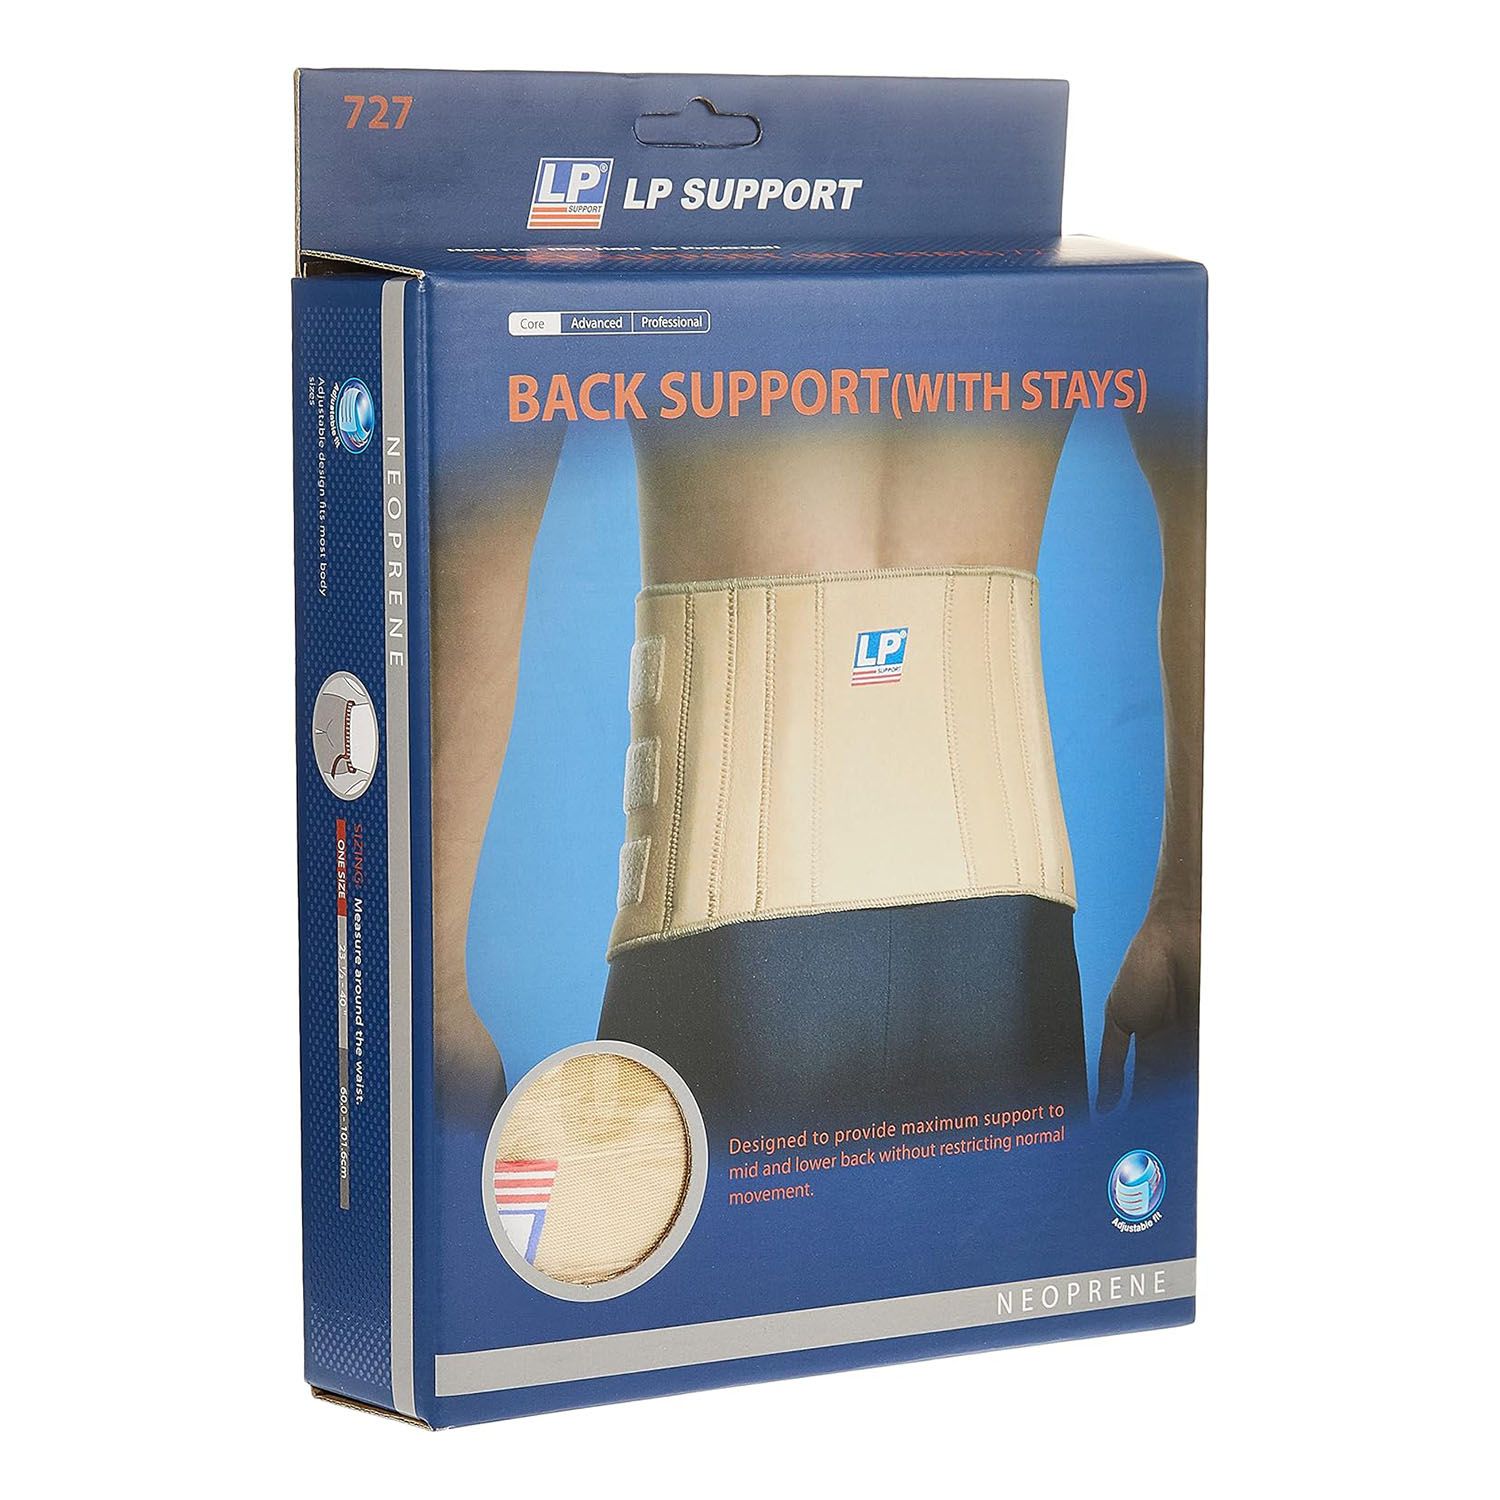 LP Support Back Support box